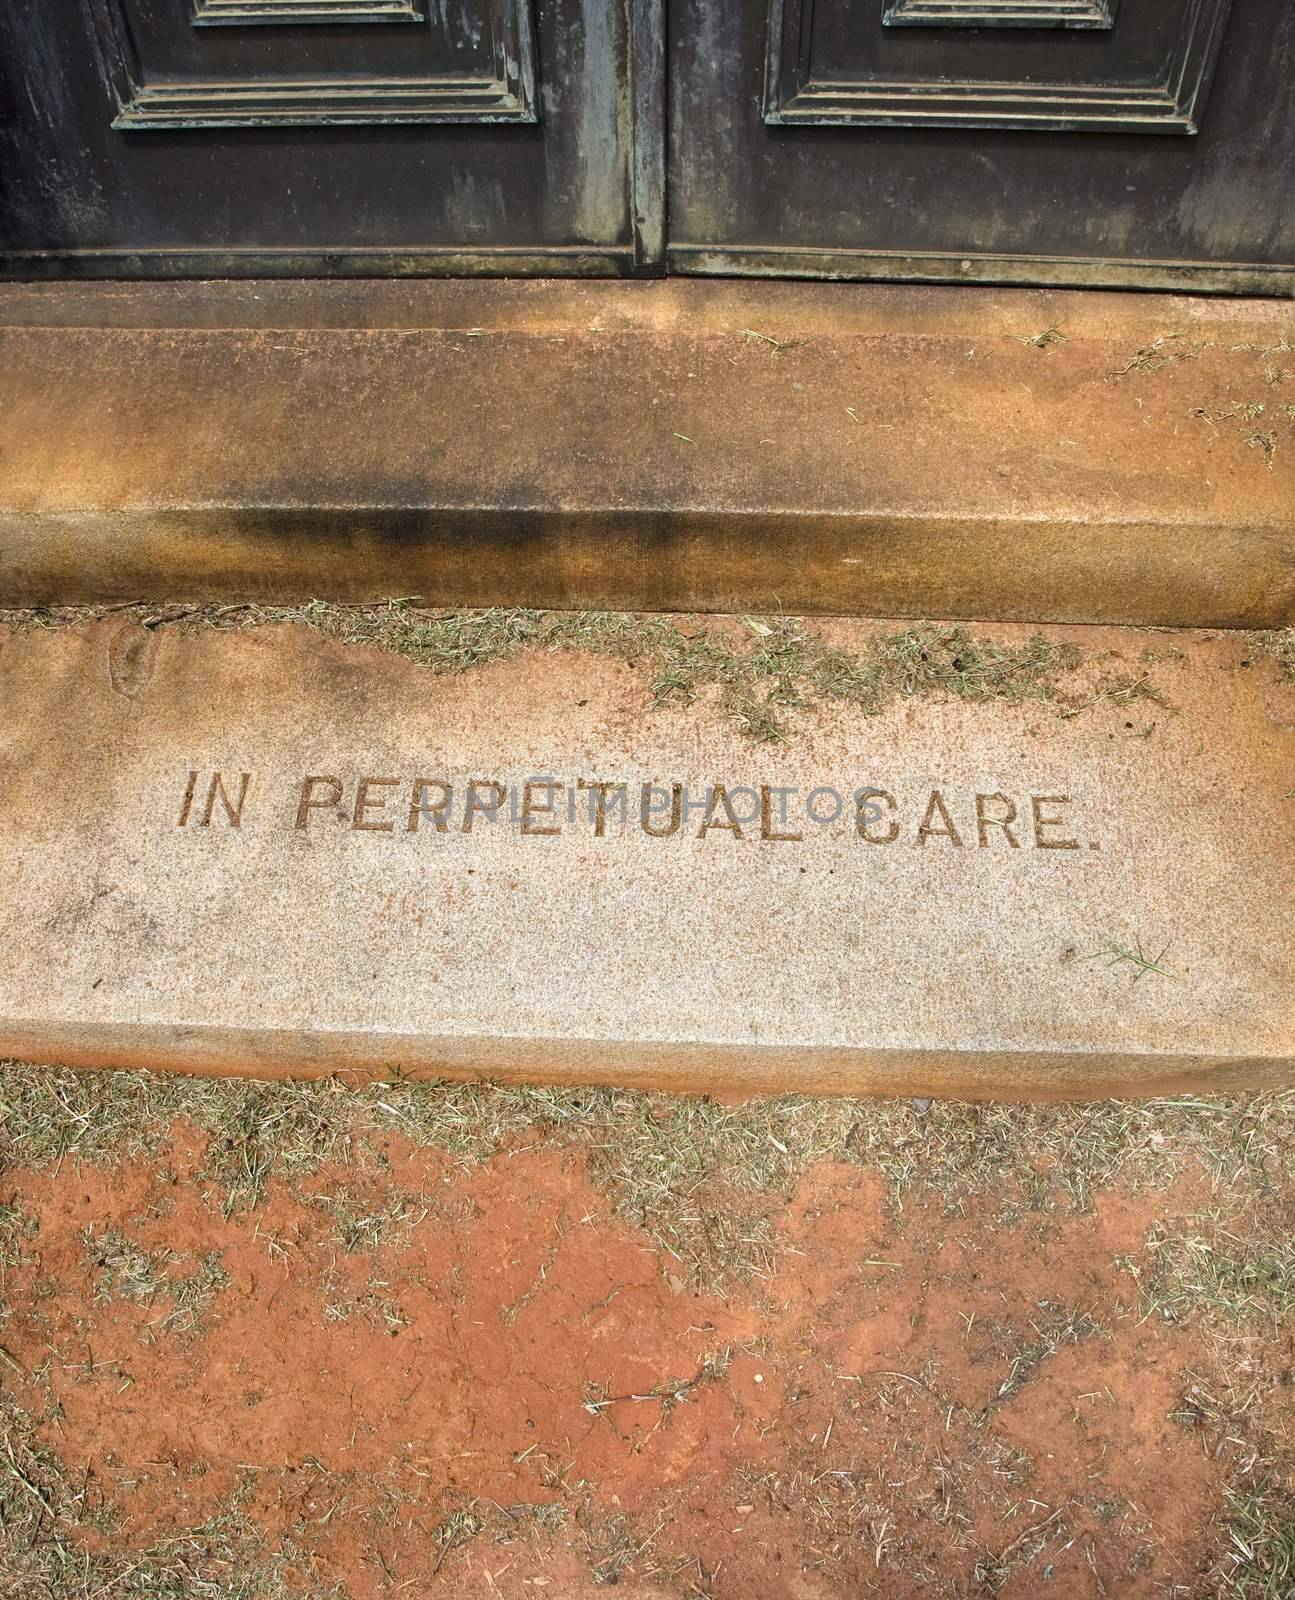 Mausoleum entrance in graveyard with words, "In Perpetual Care"